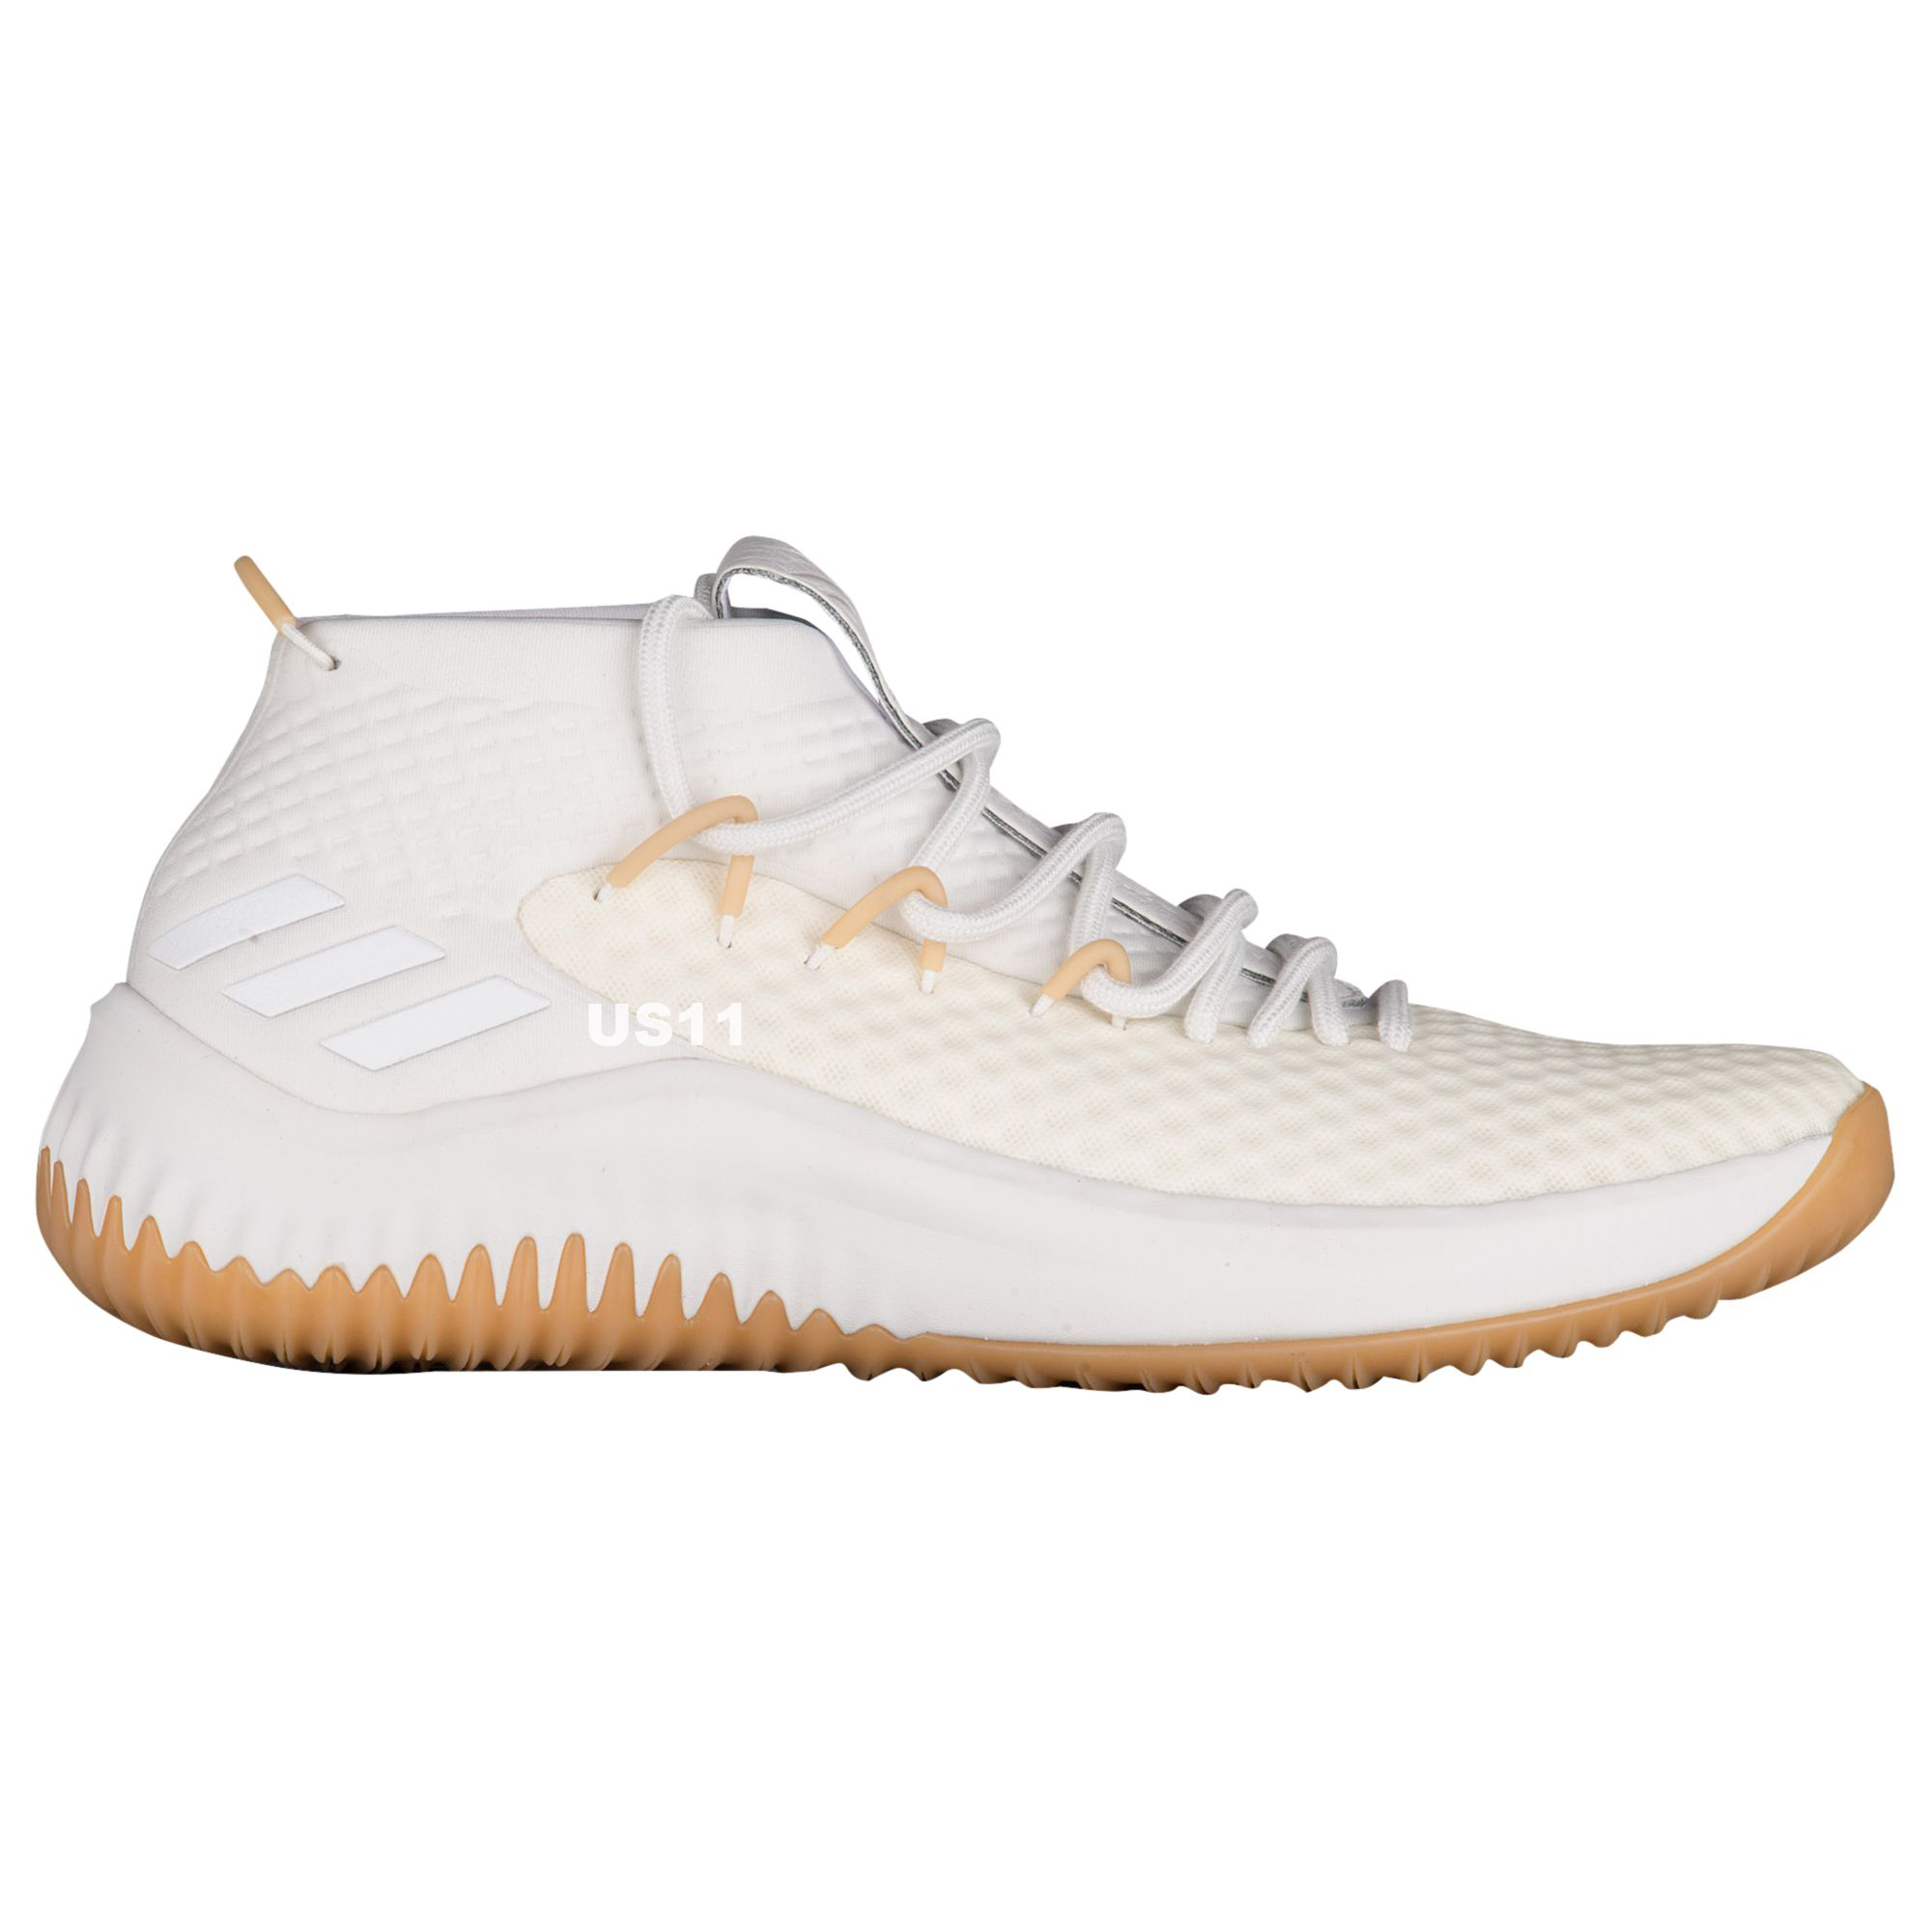 adidas dame 4 off white gum 2 - WearTesters